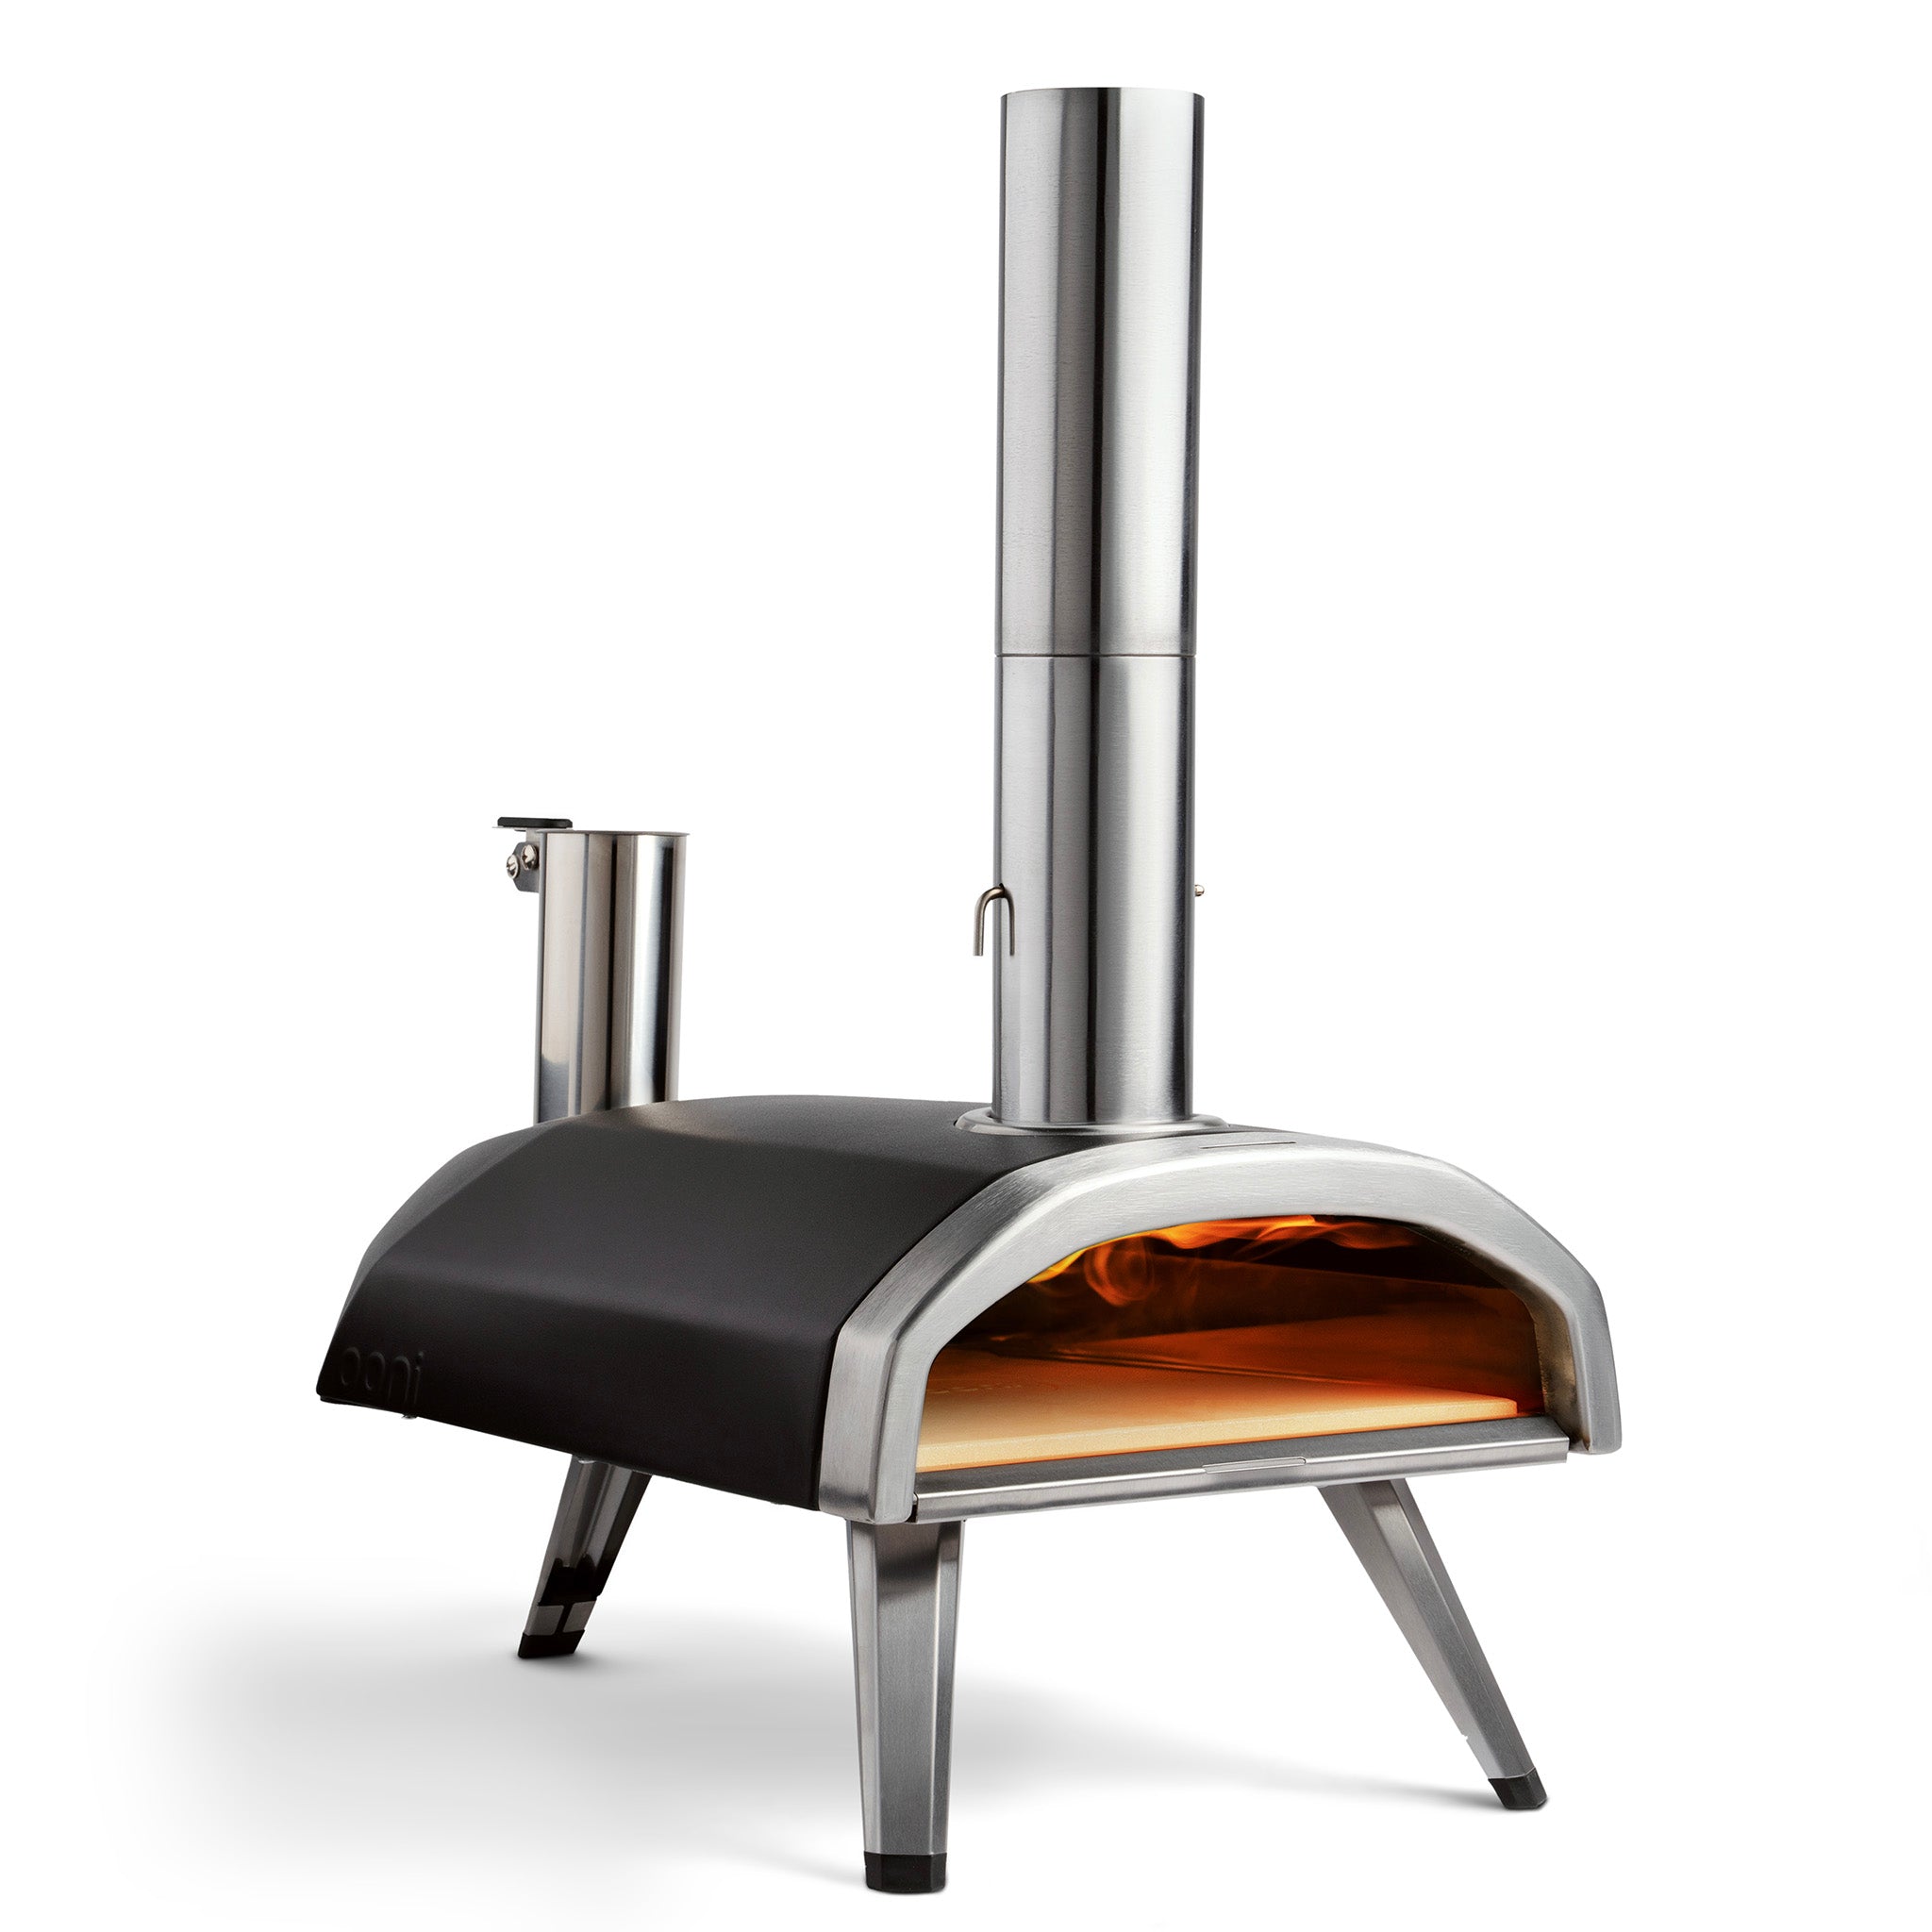 Ooni Fyra 12 Wood Pellet Pizza Oven
•	Hardwood pellet fueled for consistently high heat and low maintenance
•	Wood fired flavored 12” pizzas
•	Reaches 950°F (500°C) in just 15 minutes
•	Cooks stone-baked pizzas in as little as 60 seconds!
•	Ultra portable at just 22lbs (10kg)
